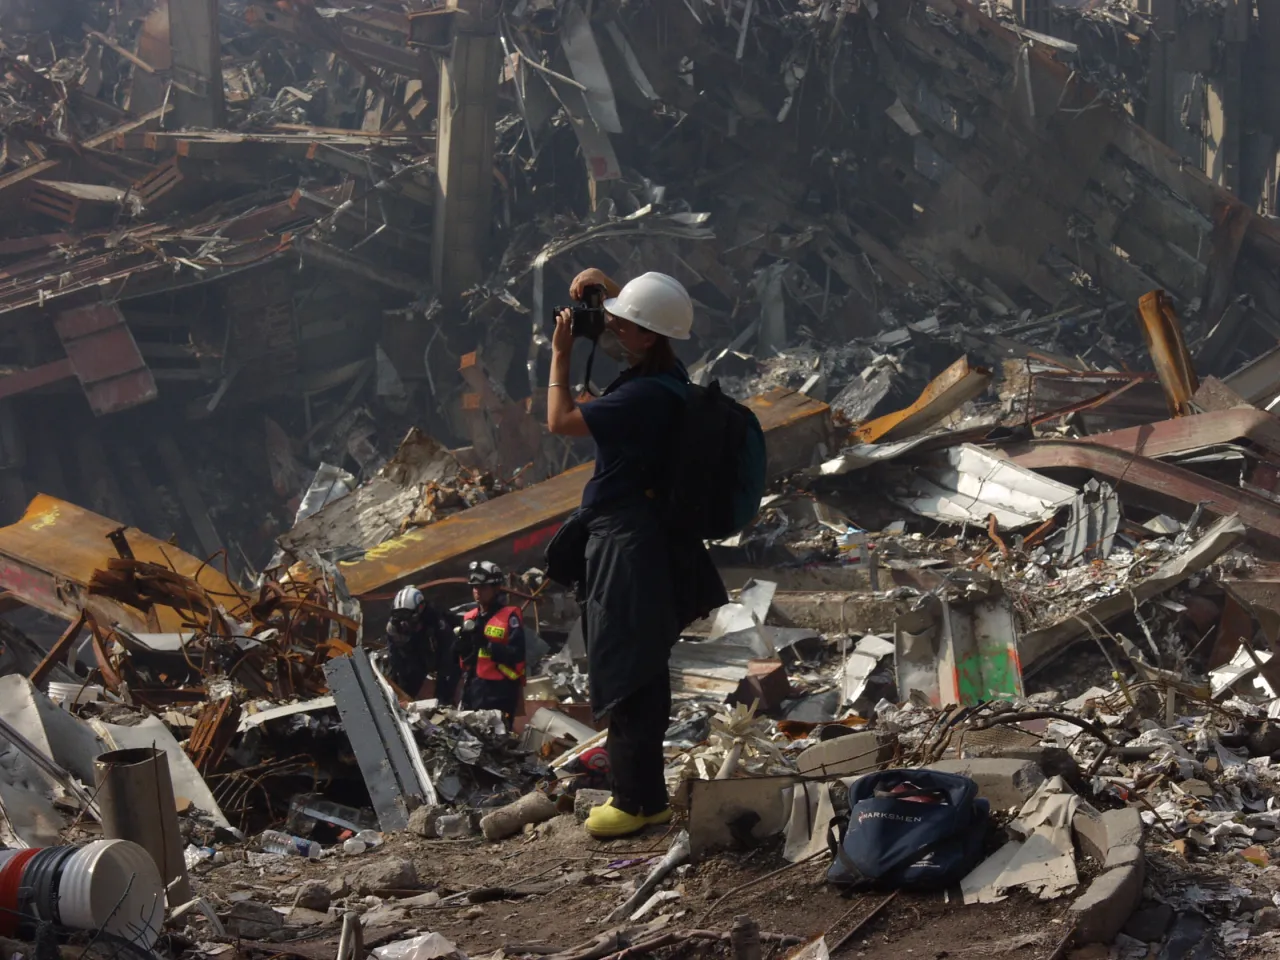 Image: 9/11 - A photographer pauses to take a picture of the recovery operations underway at the World Trade Center